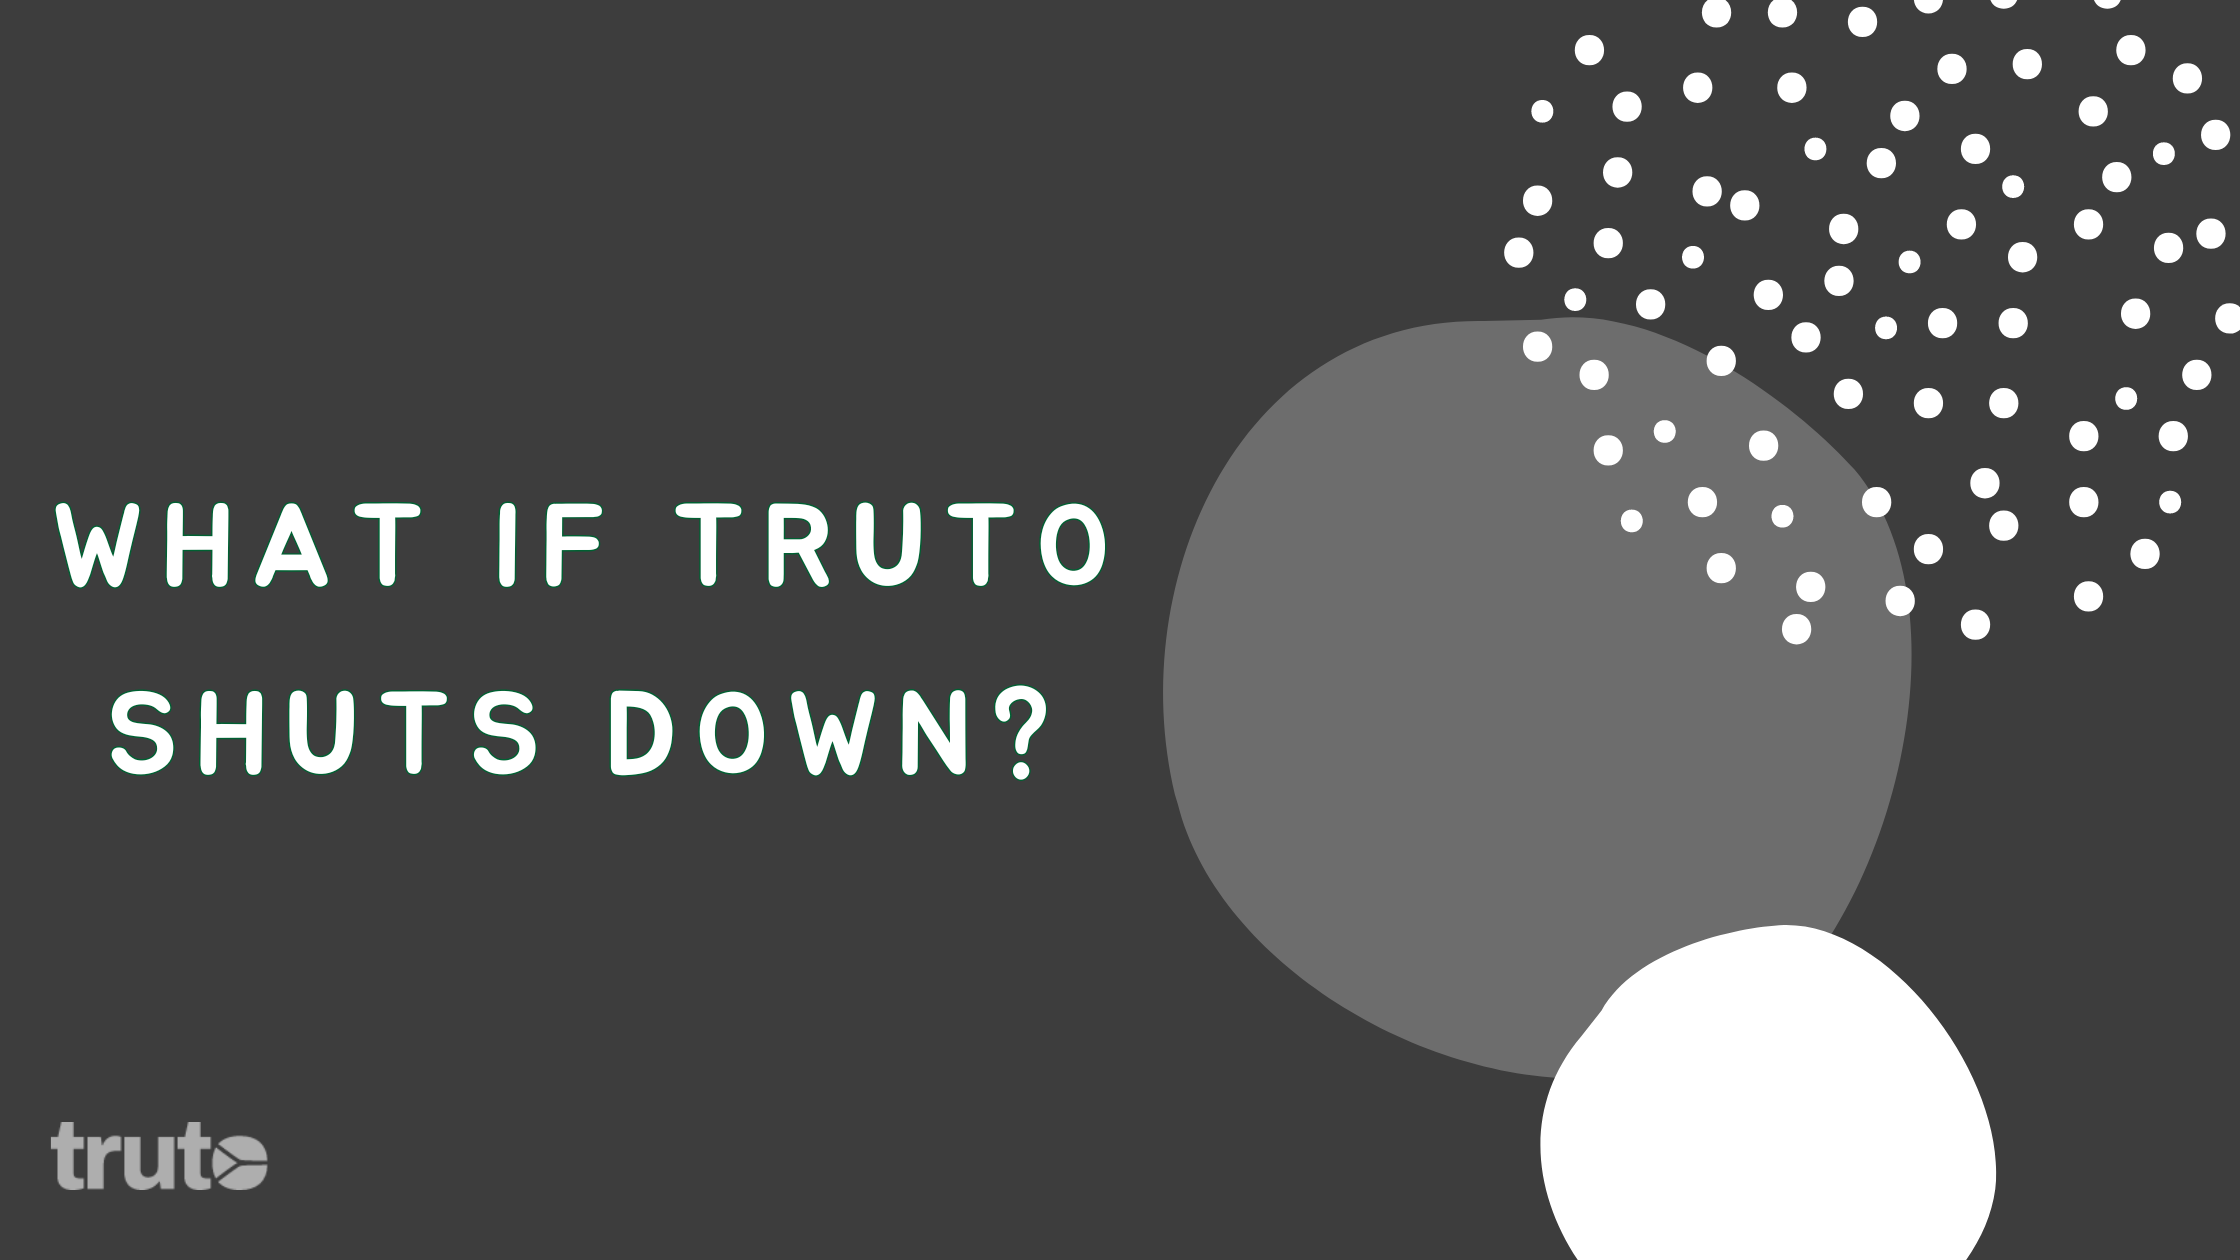 What if Truto shuts down?